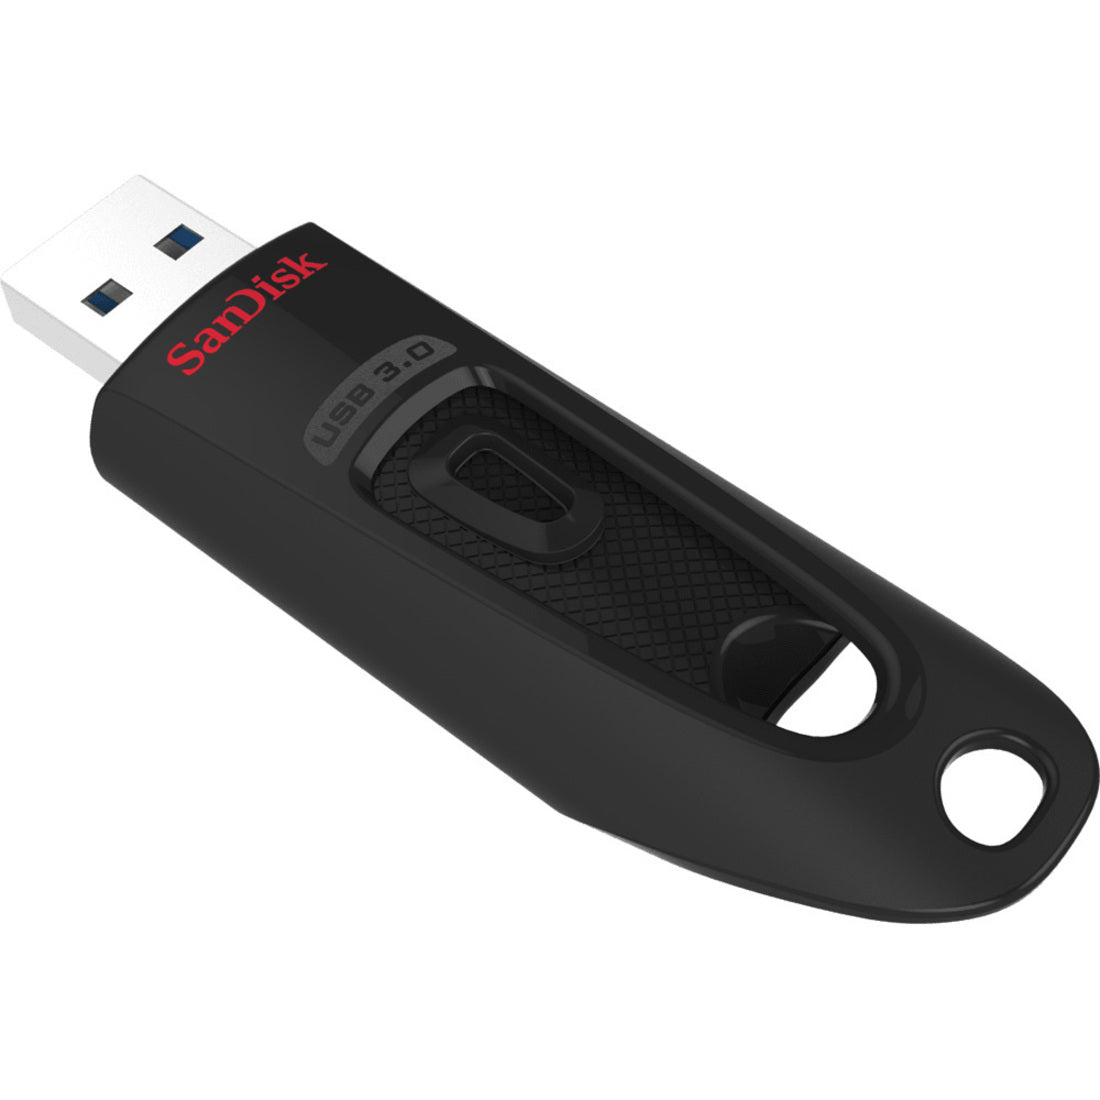 SanDisk SDCZ48-064G-AW46 64GB Ultra USB 3.0 Flash Drive, High-Speed Data Transfer and Reliable Storage